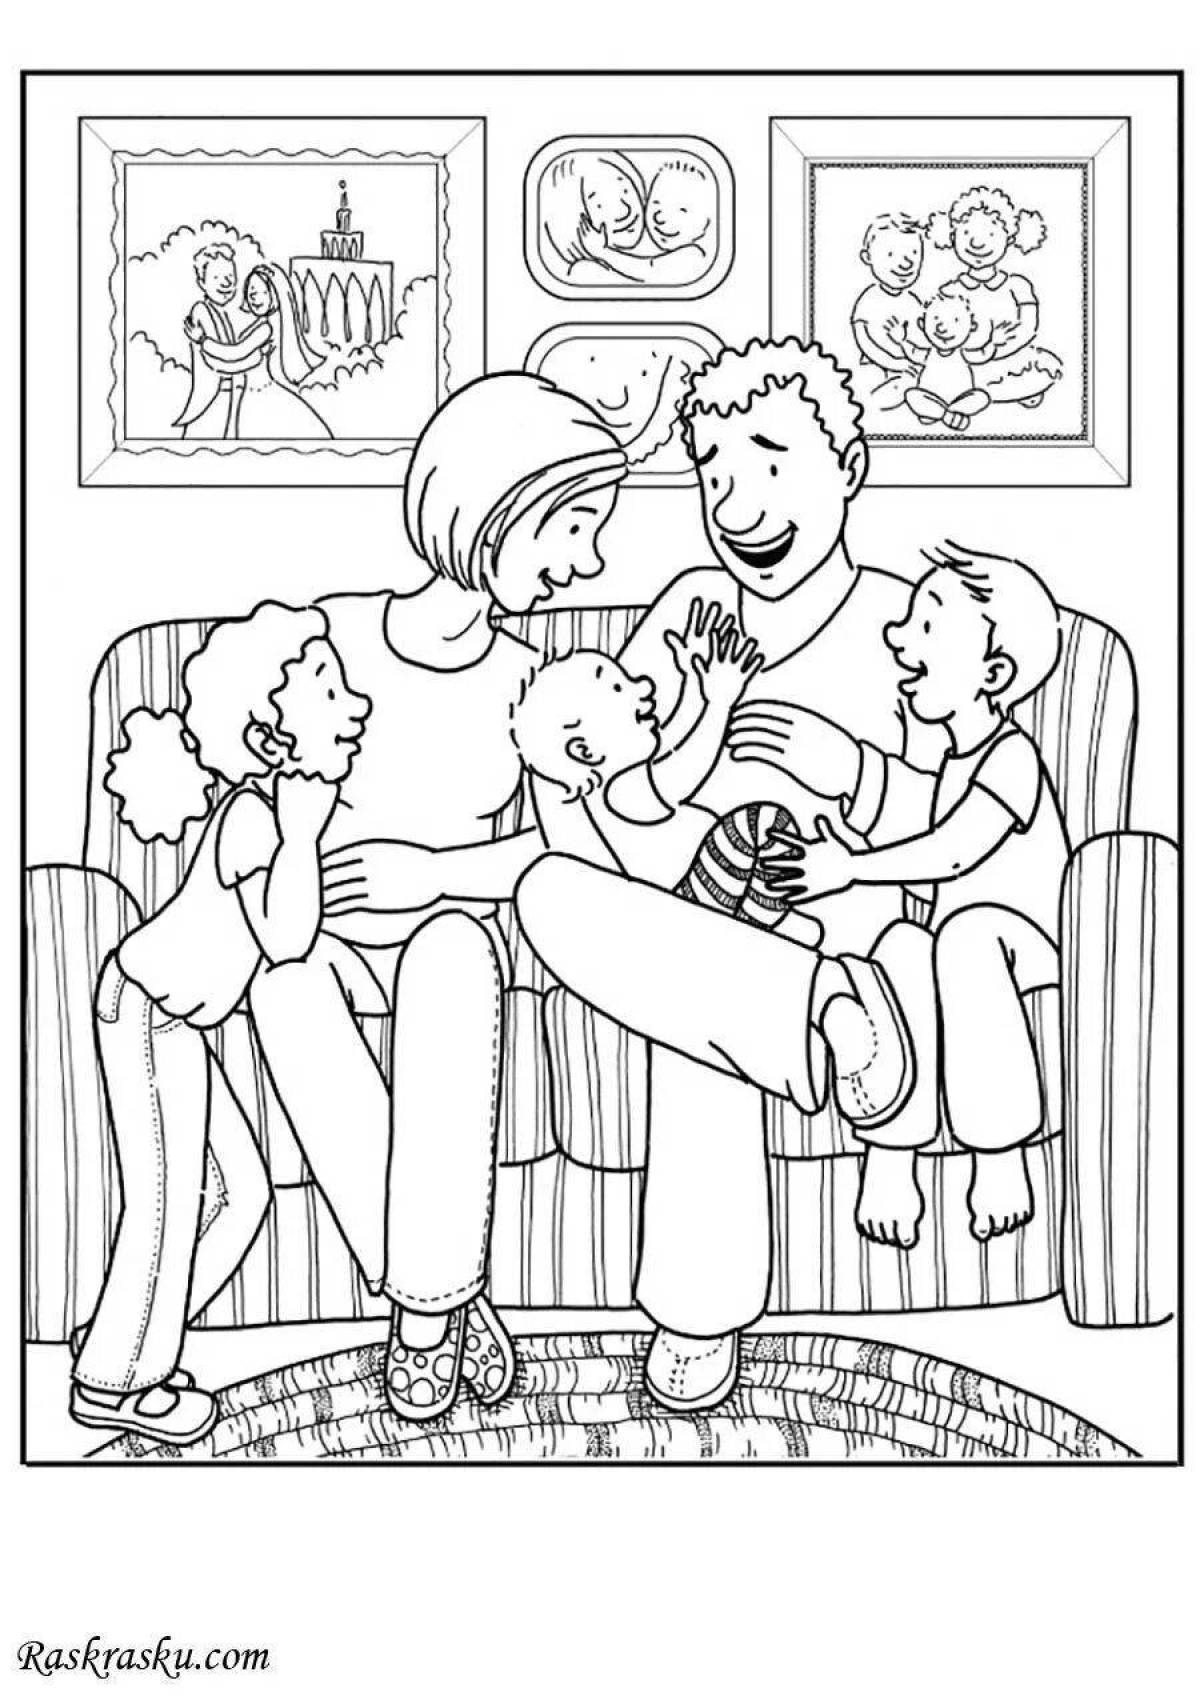 Great family coloring book for 7 year olds